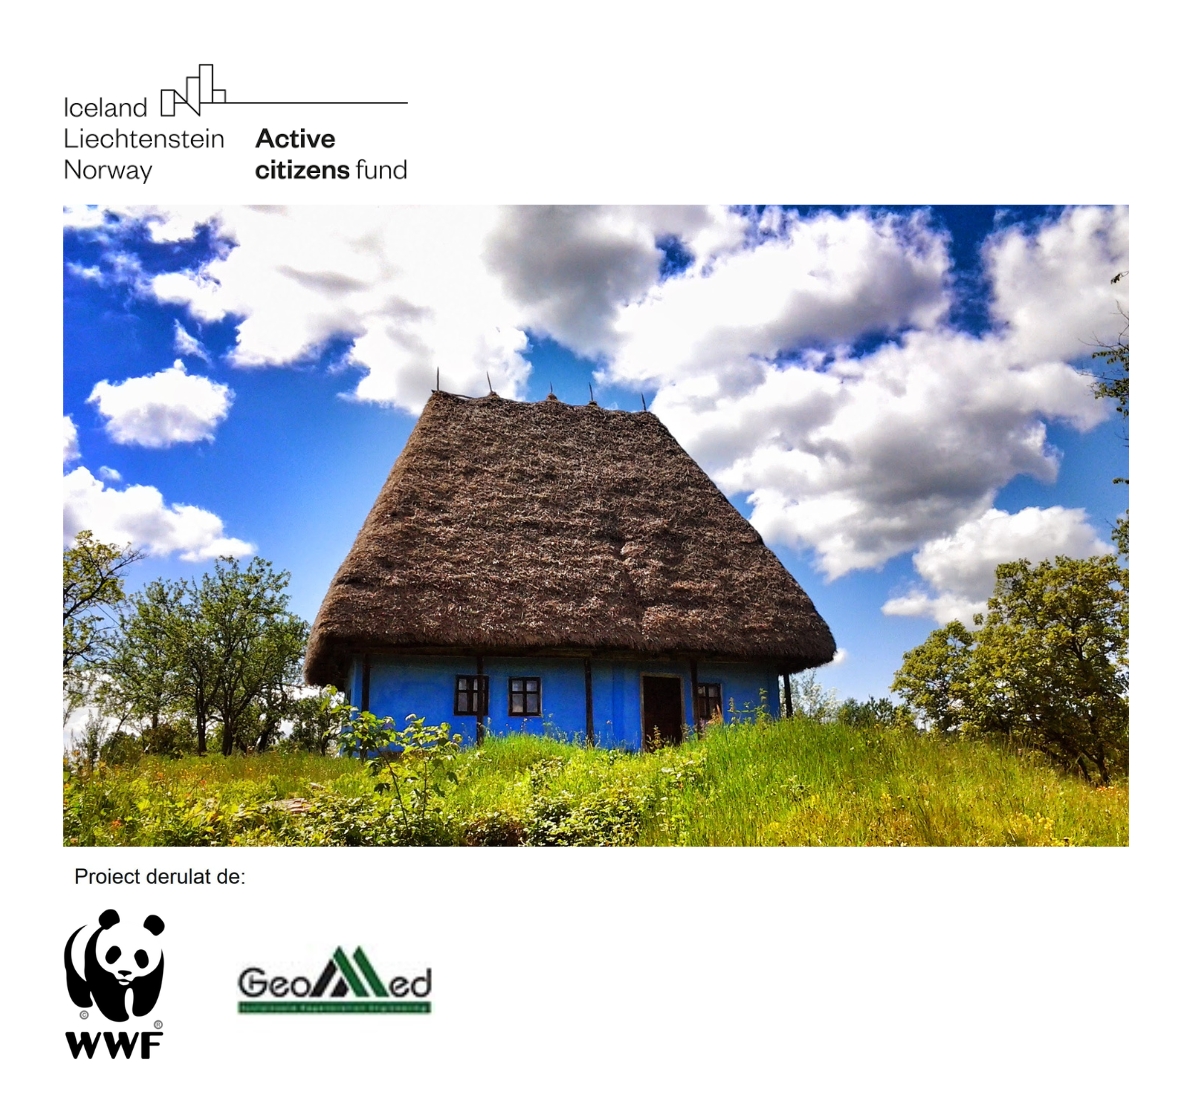 Northern Romania: WWF project encourages civic involvement in environmental strategies in Maramureș